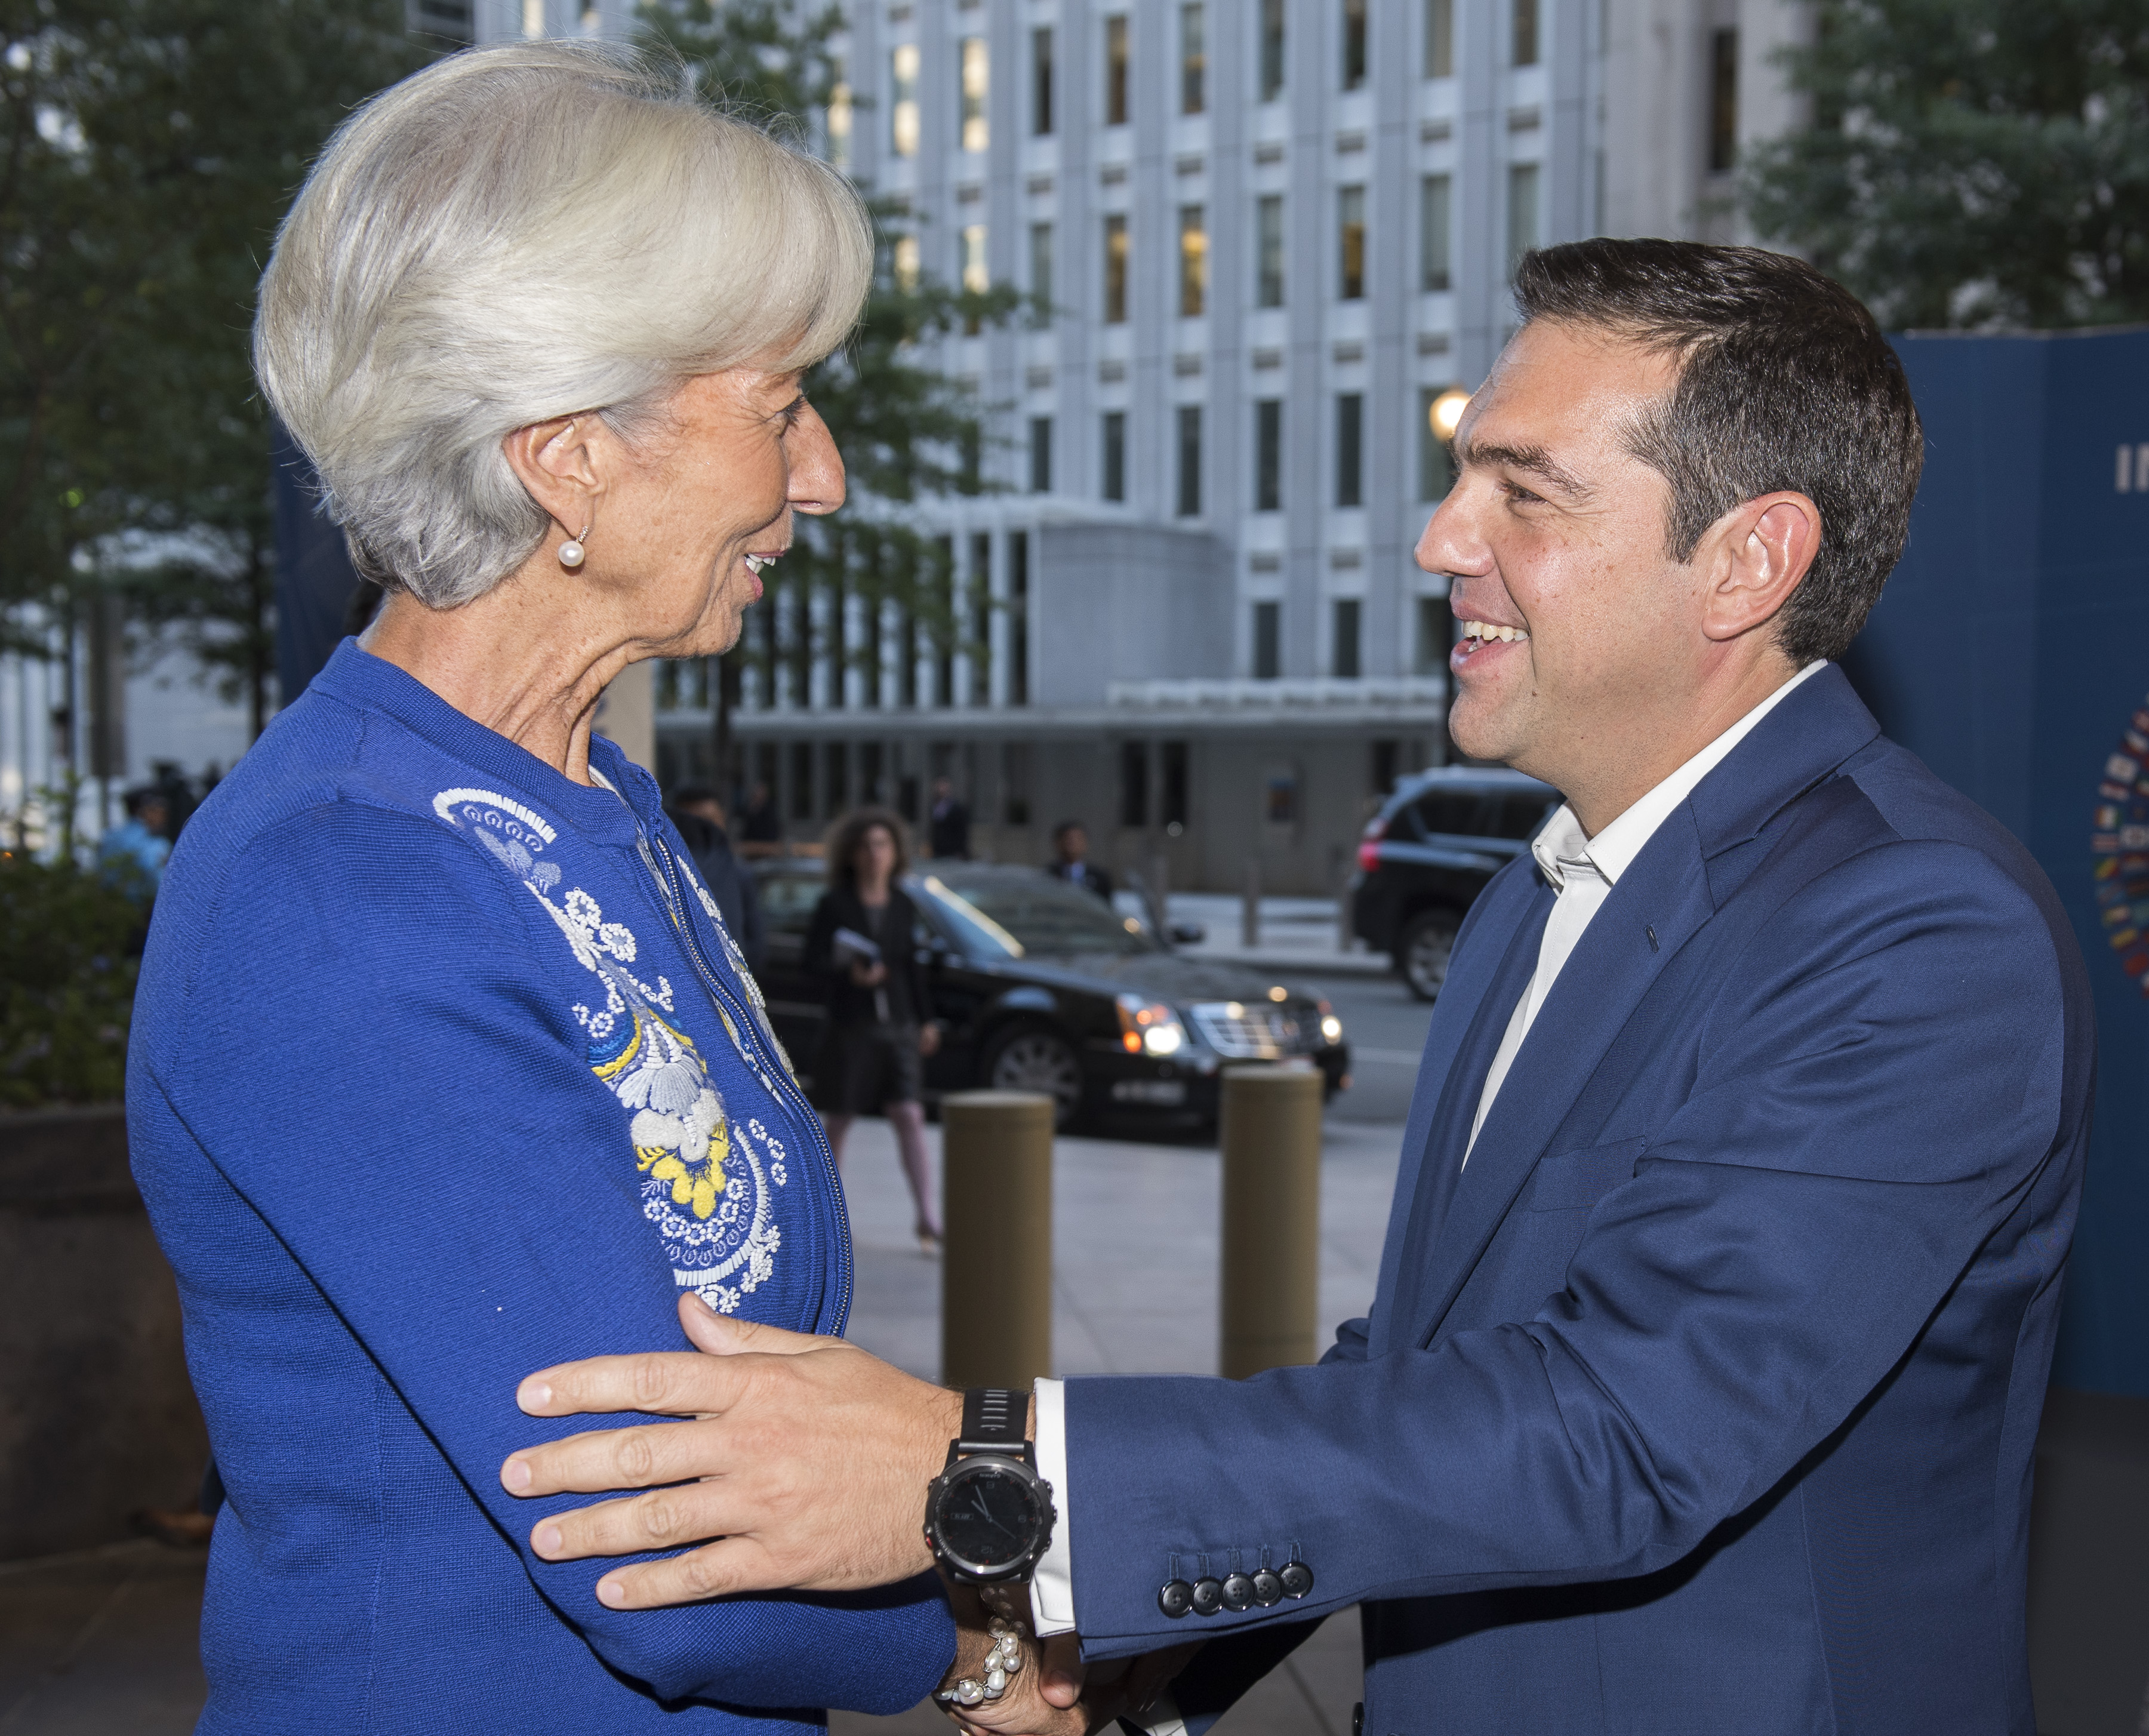 IMF: Greek debt relief precondition for standby credit line